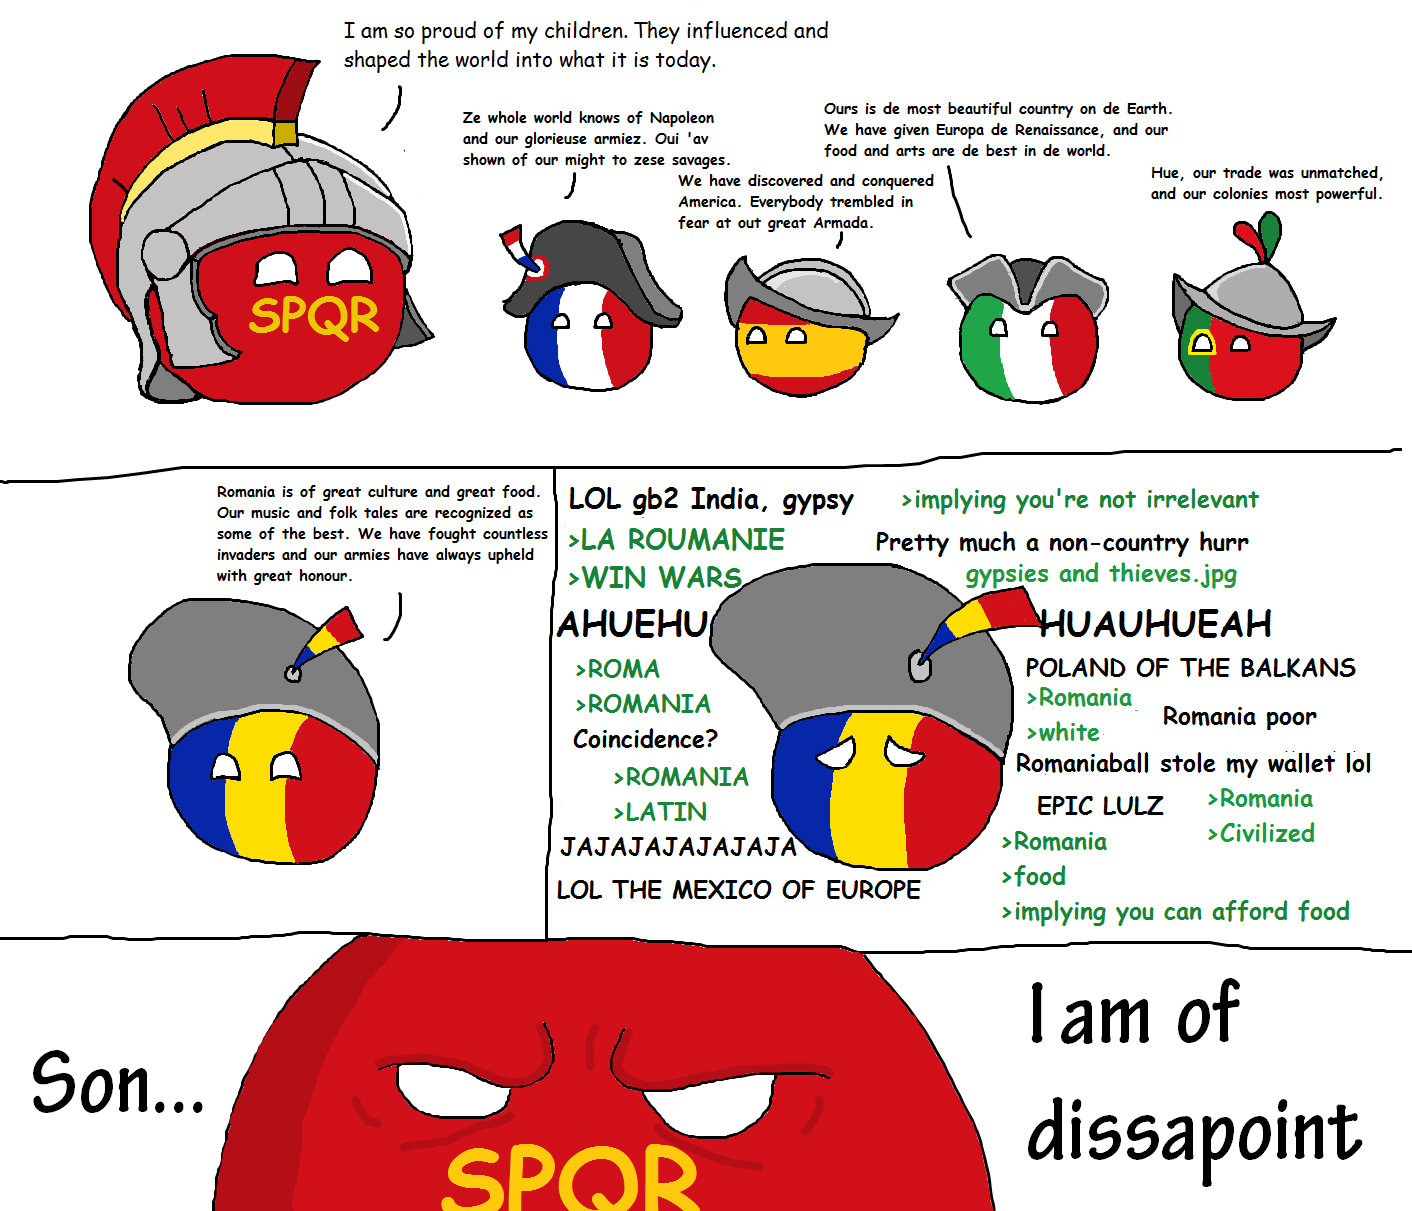 Poor+romania+spqr+for+life_4ab11a_4961187.png